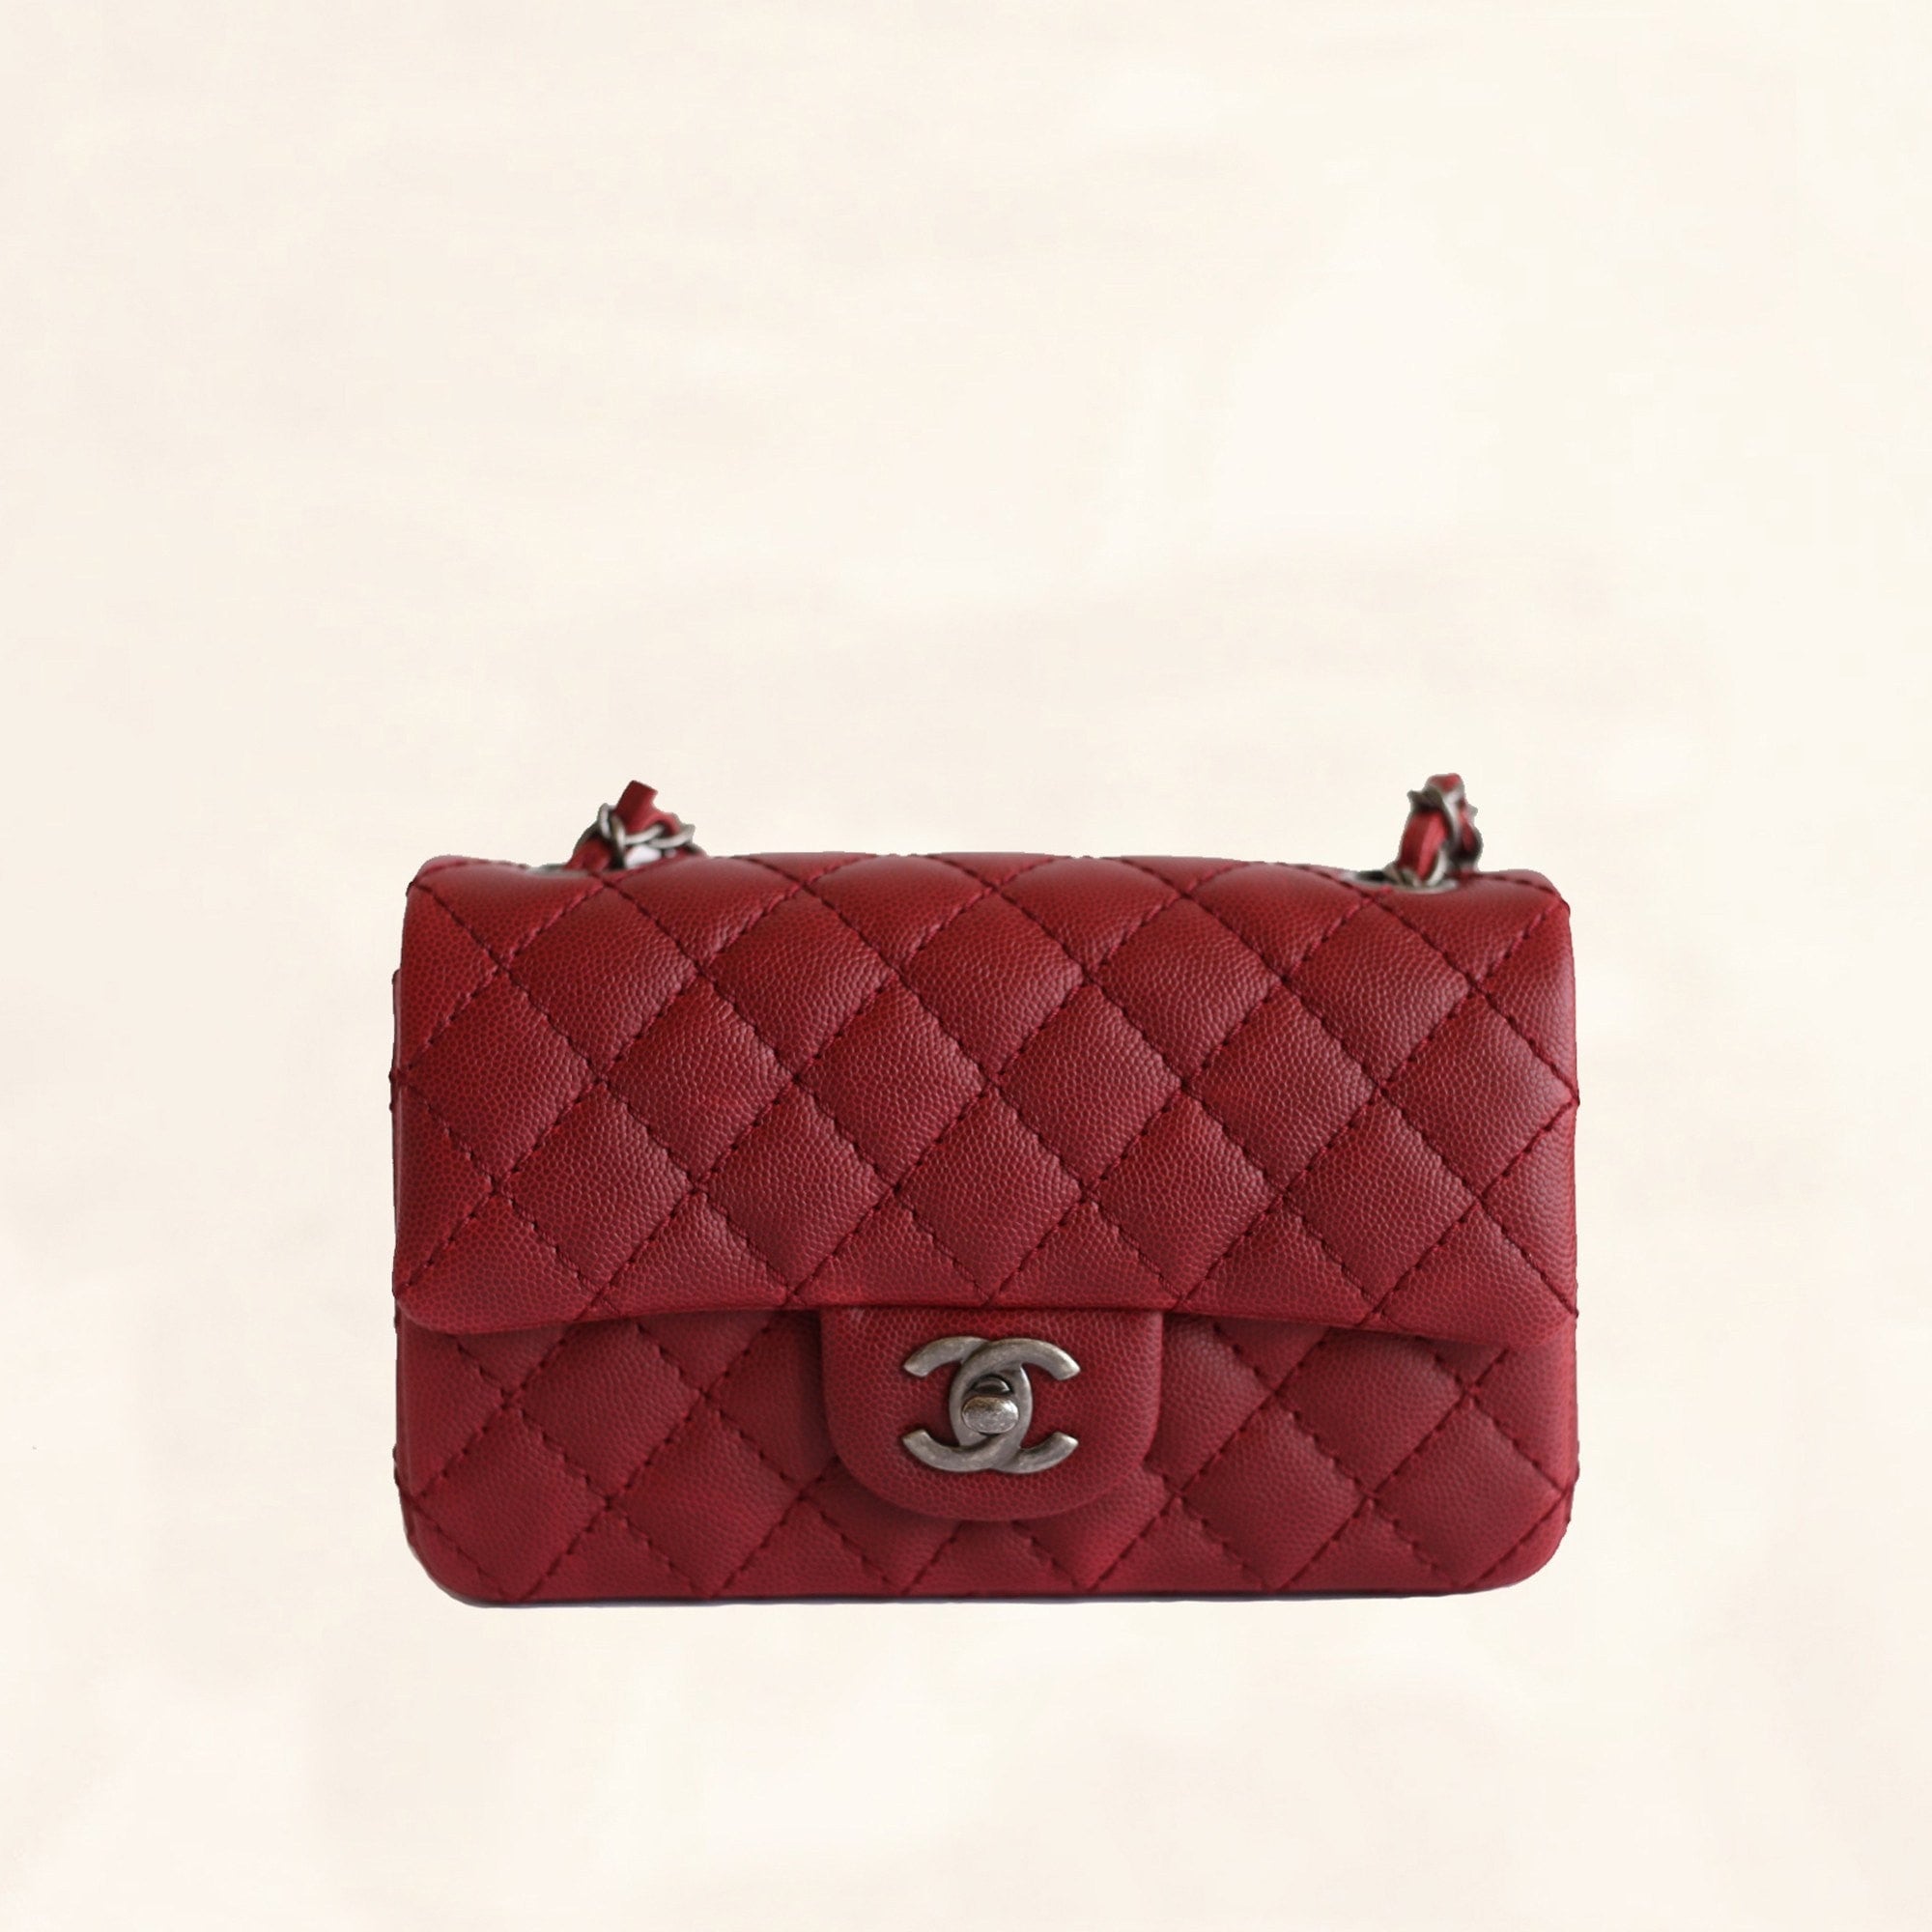 chanel red small flap bag